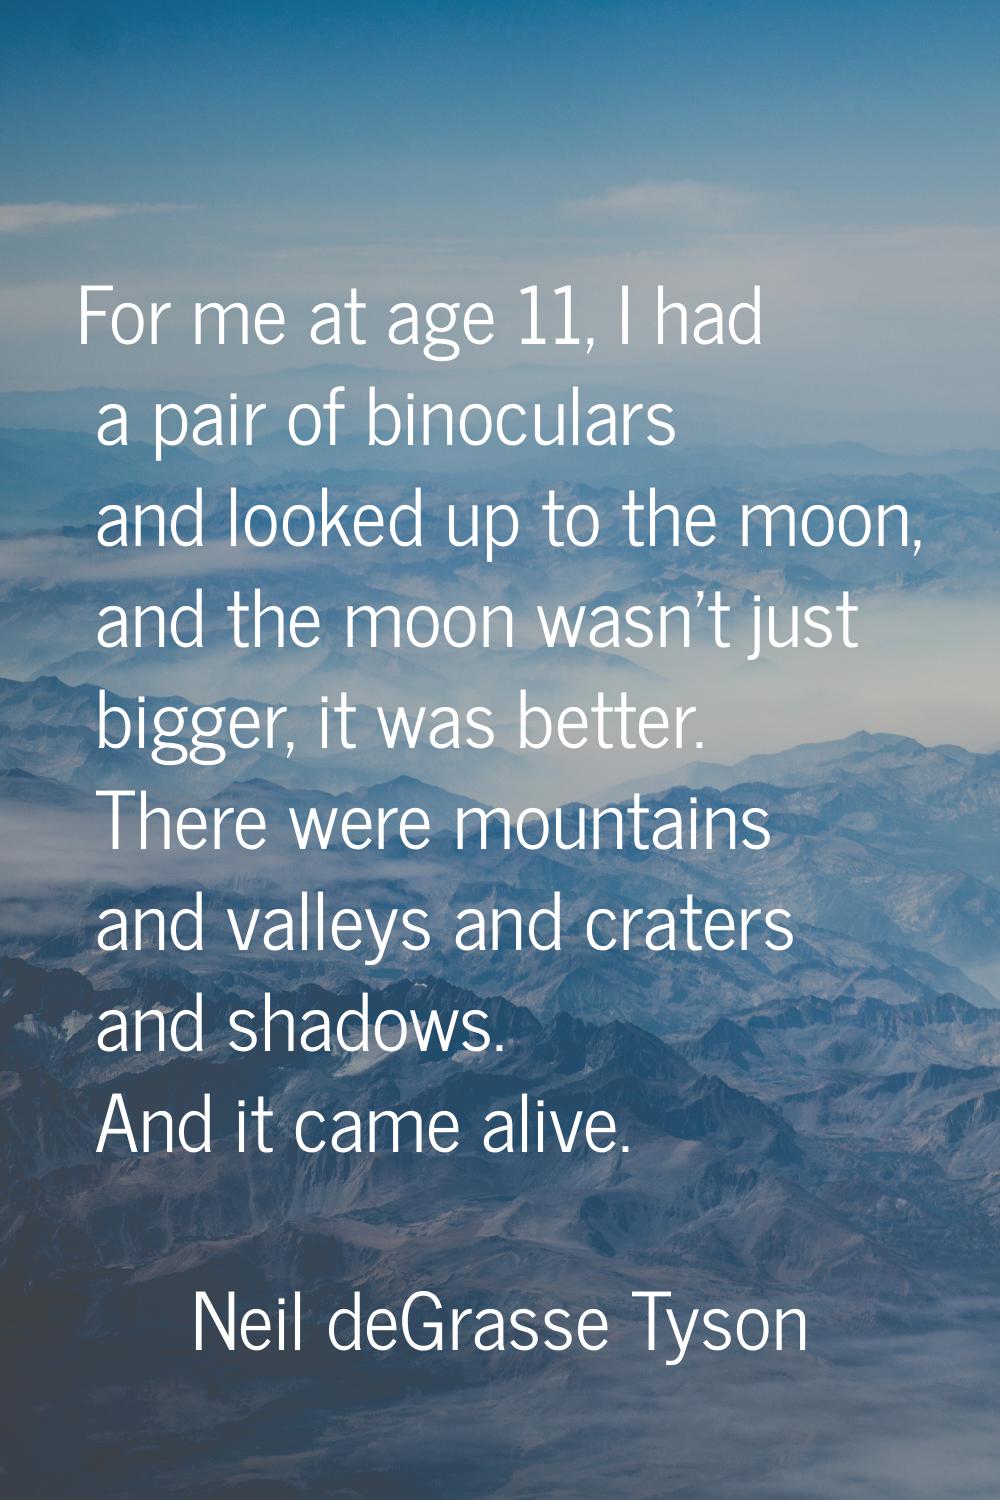 For me at age 11, I had a pair of binoculars and looked up to the moon, and the moon wasn't just bi